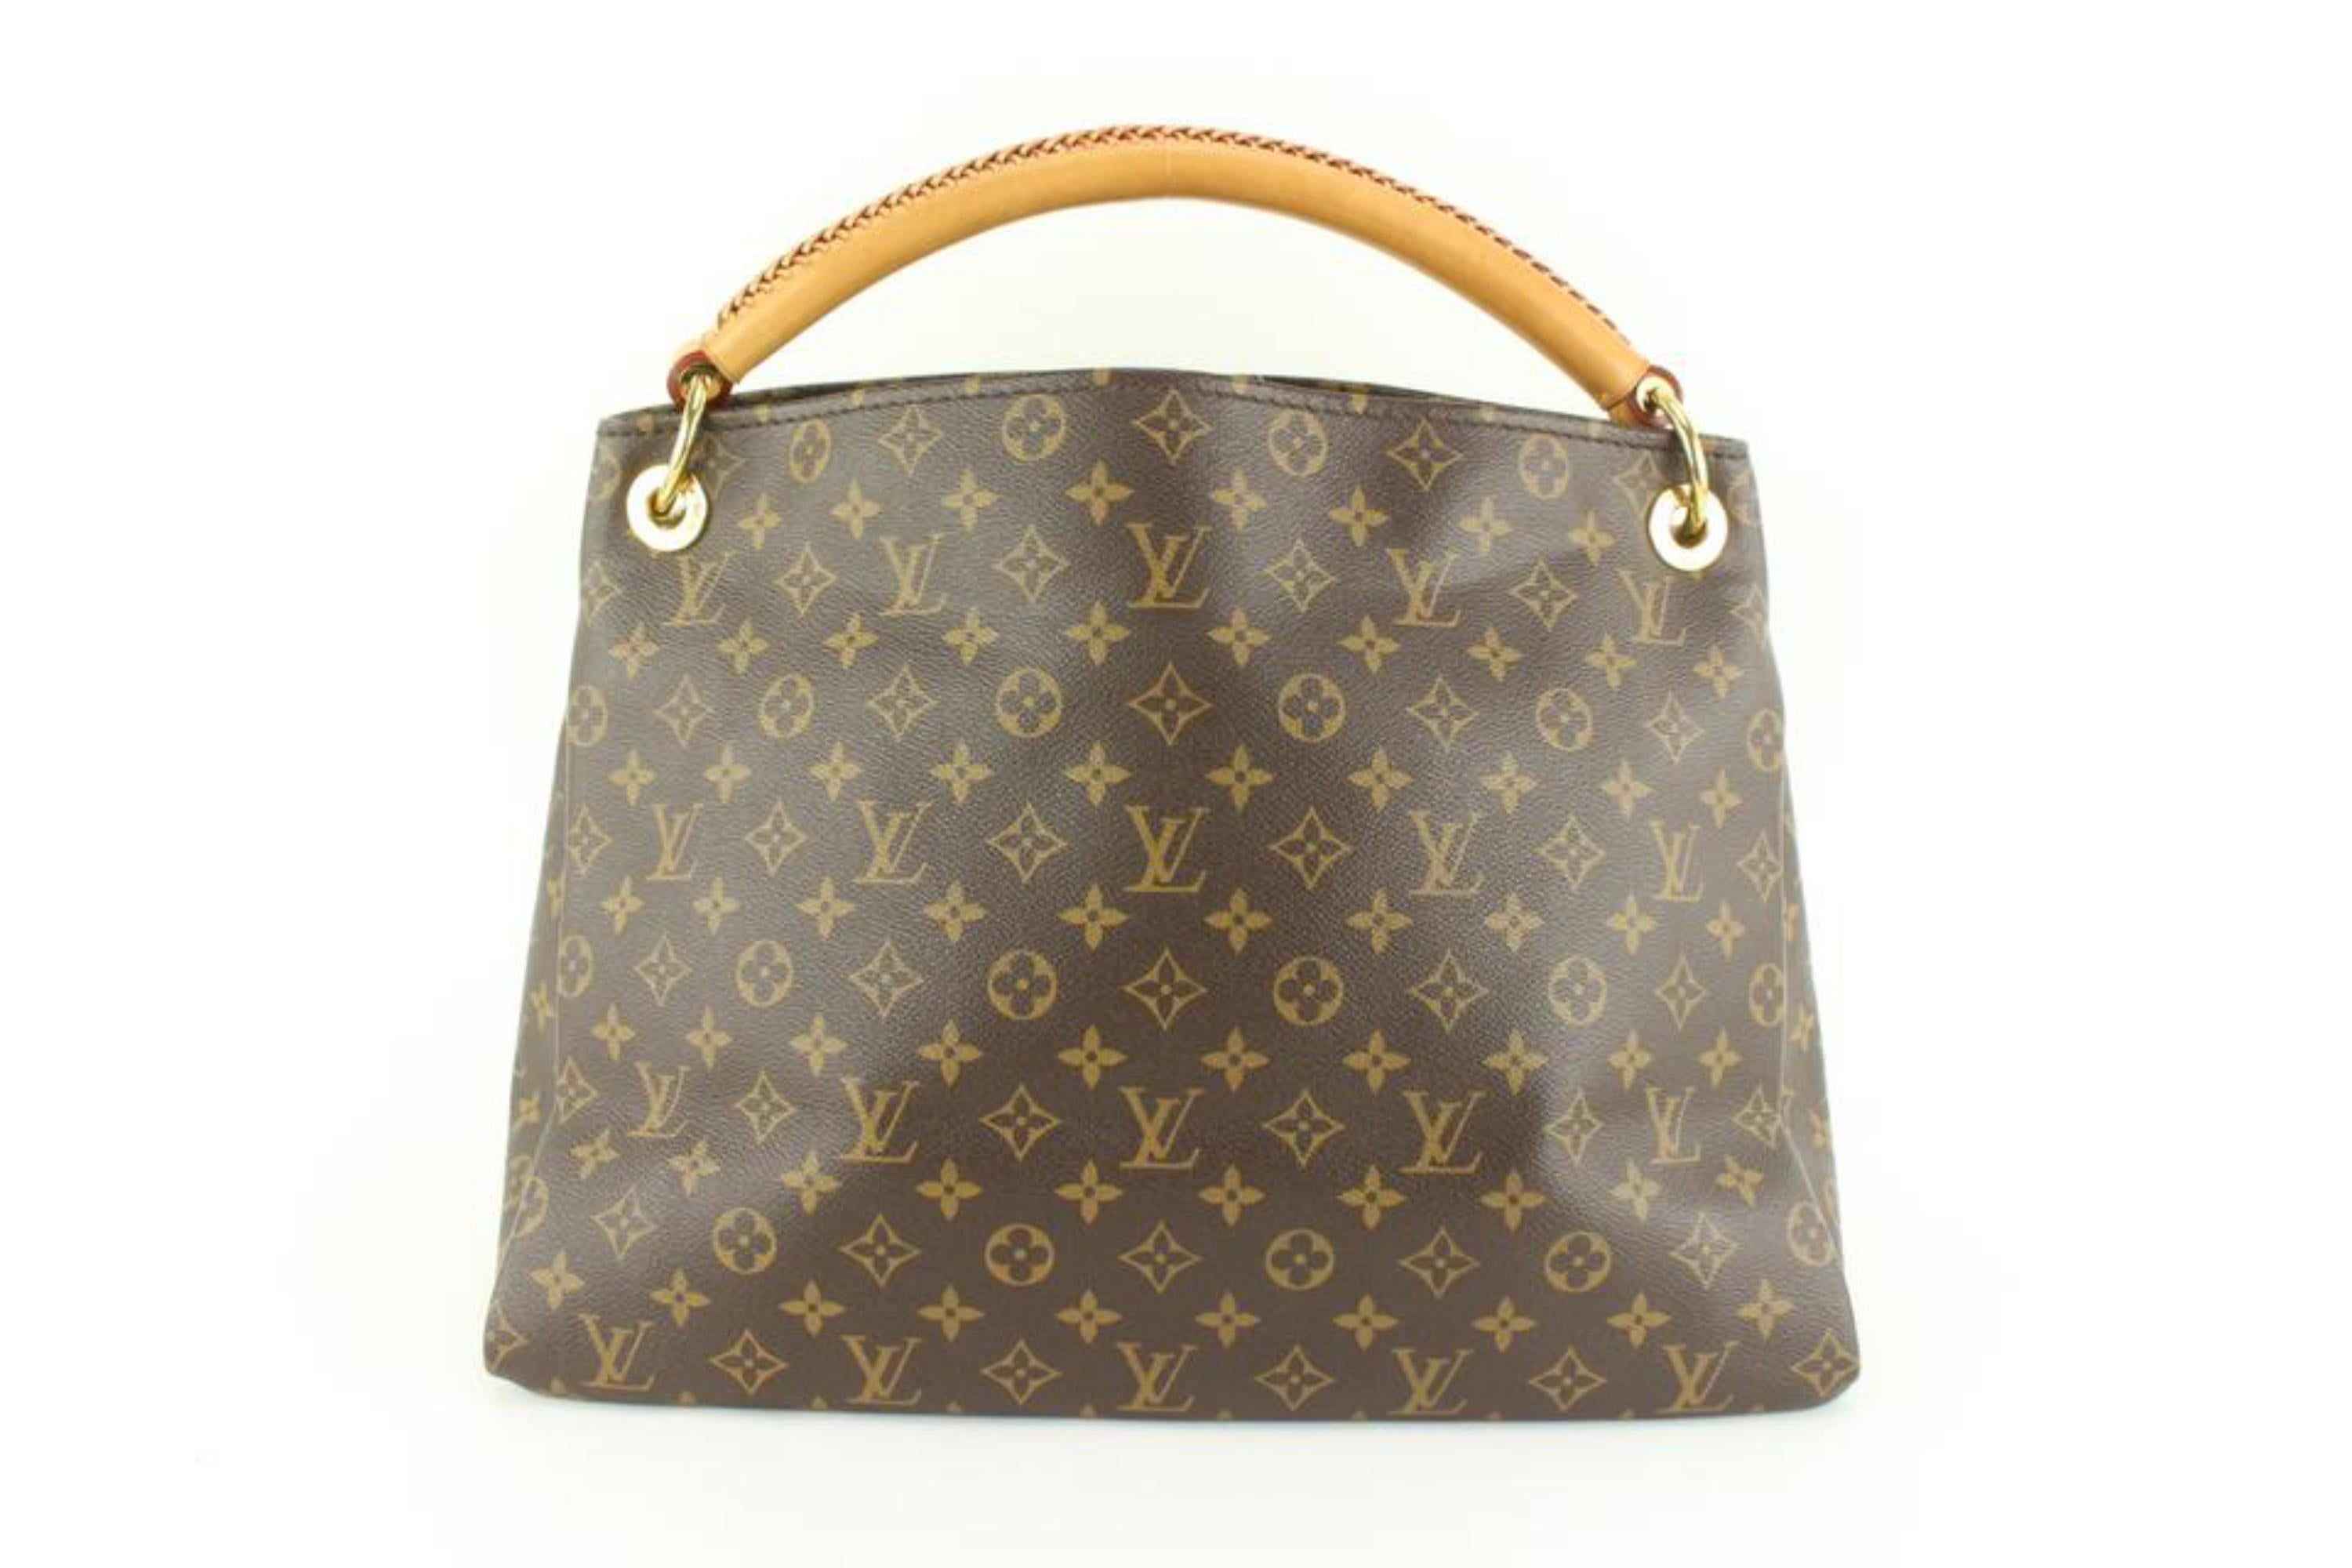 Louis Vuitton Monogram Artsy MM Hobo Bag 21lz69s In Good Condition For Sale In Dix hills, NY